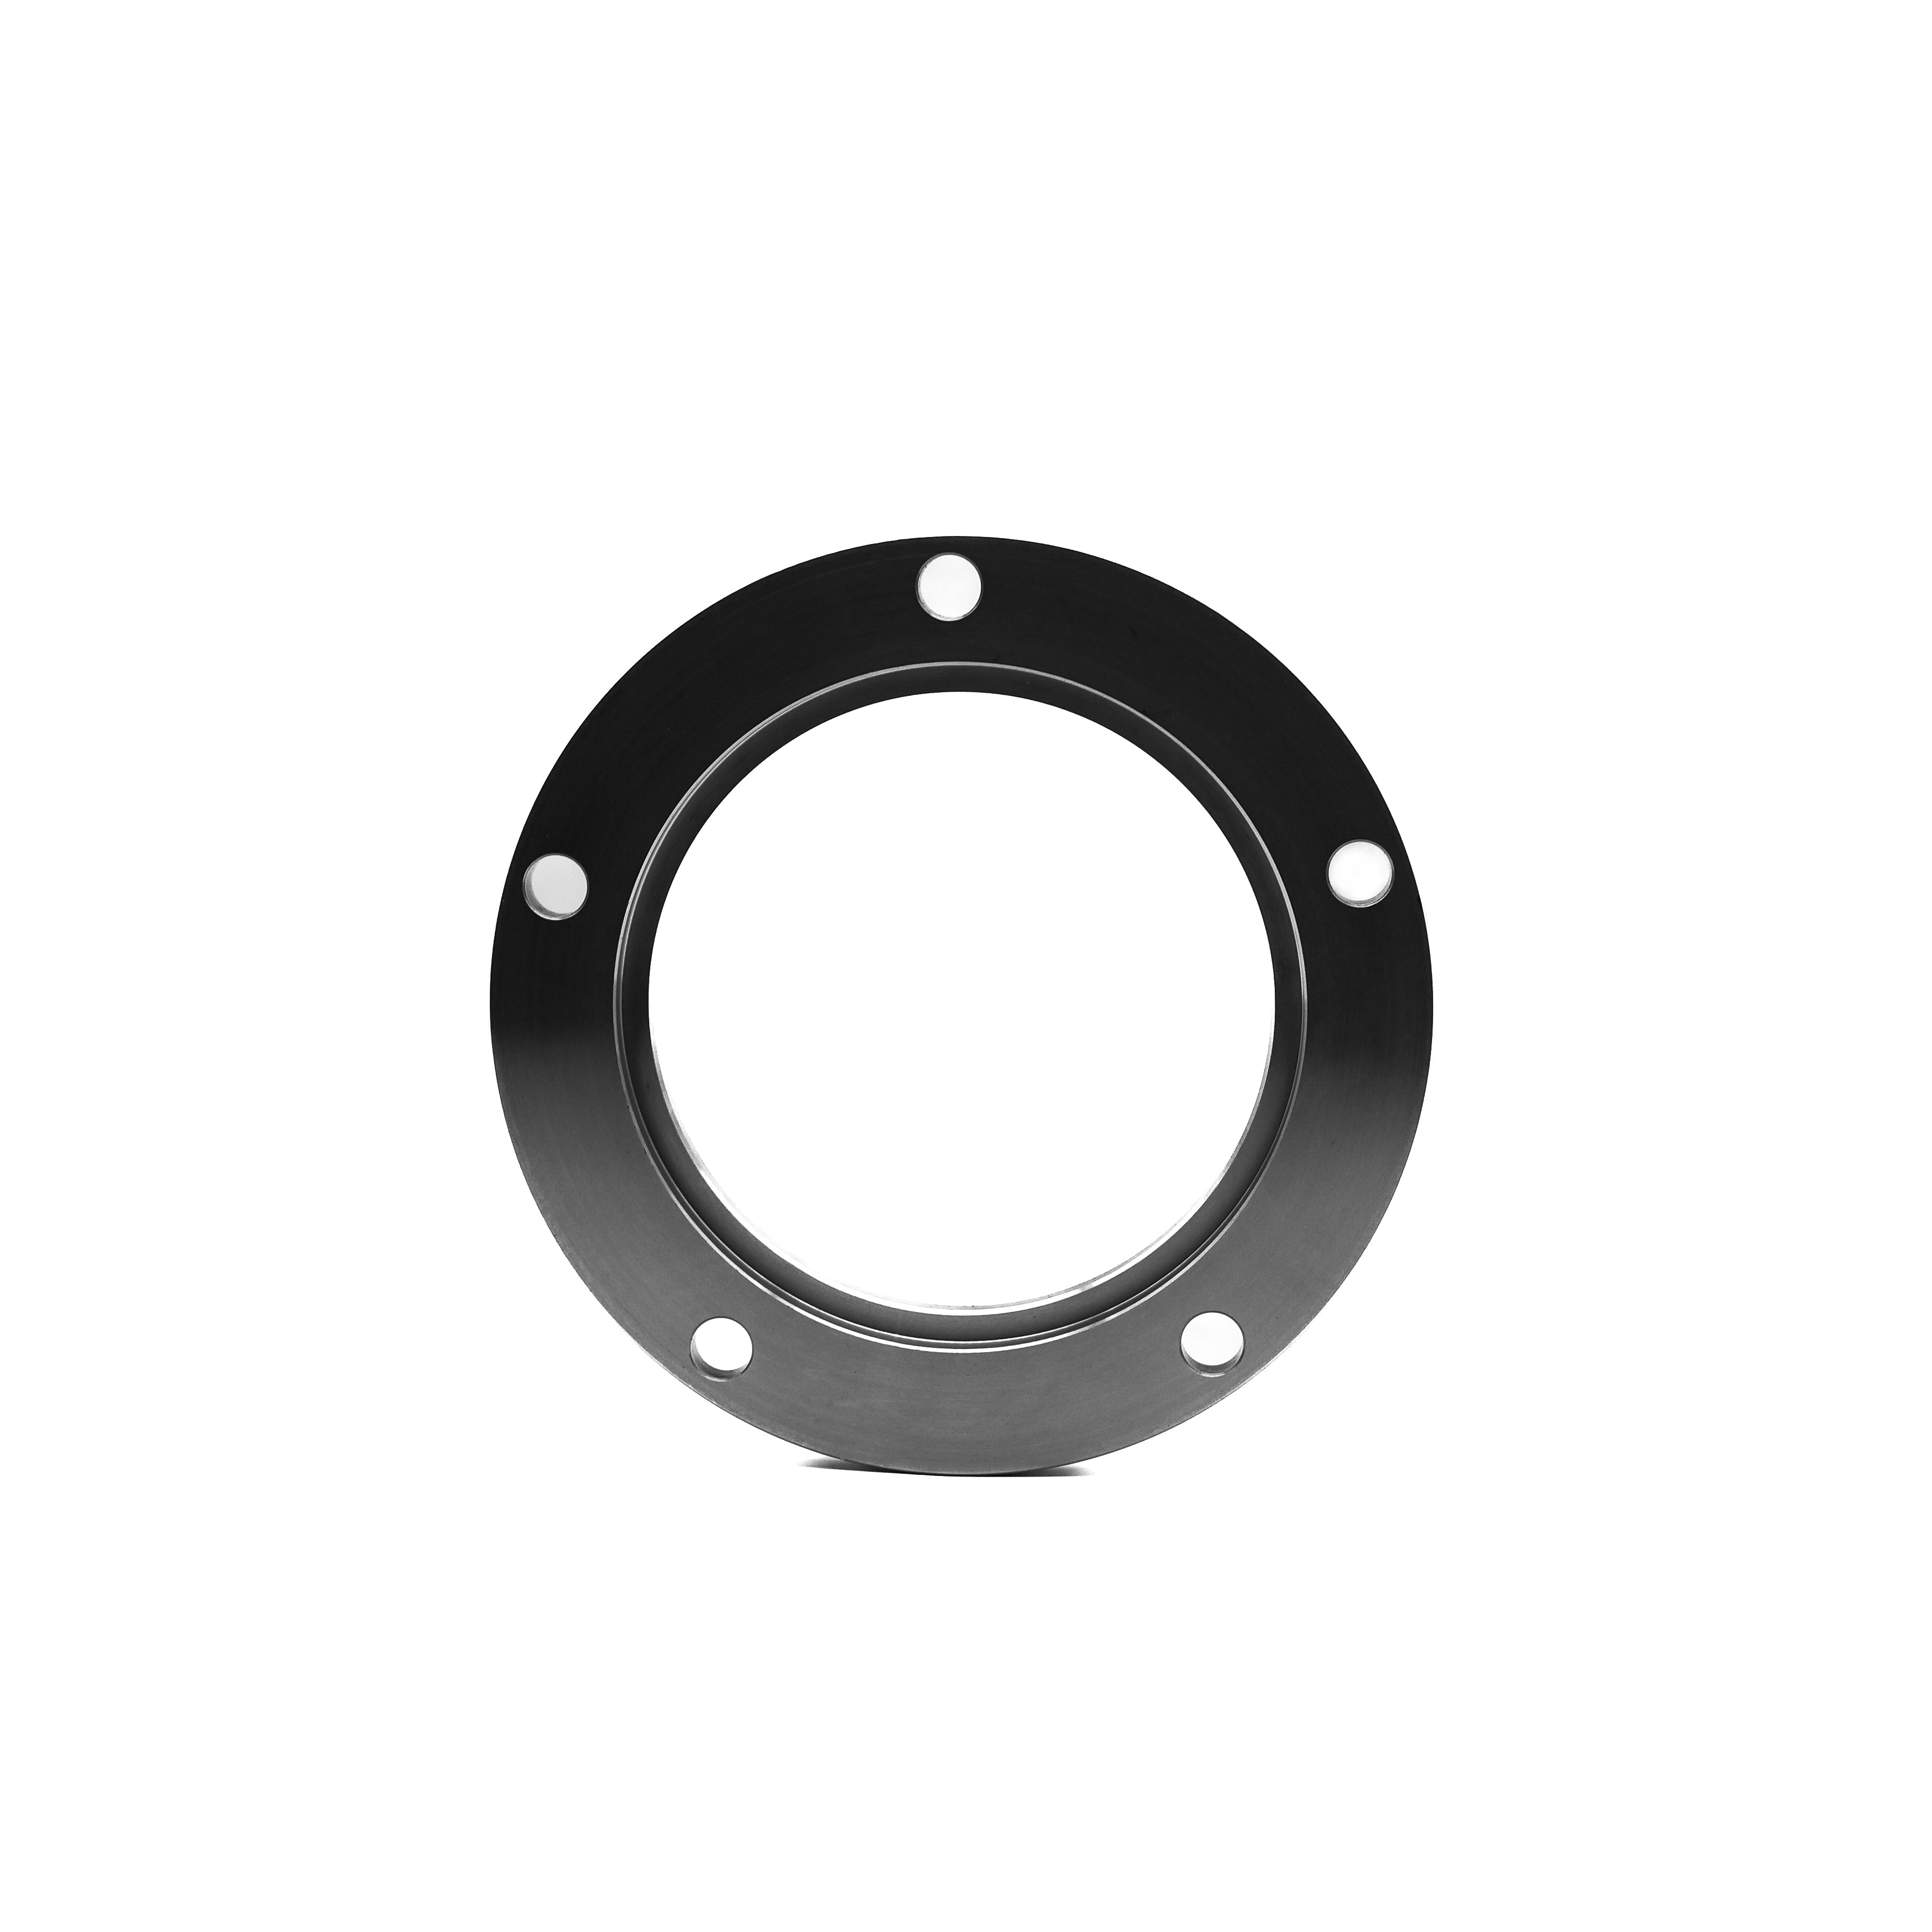 Crown adapter for TMAX 530 chain kit